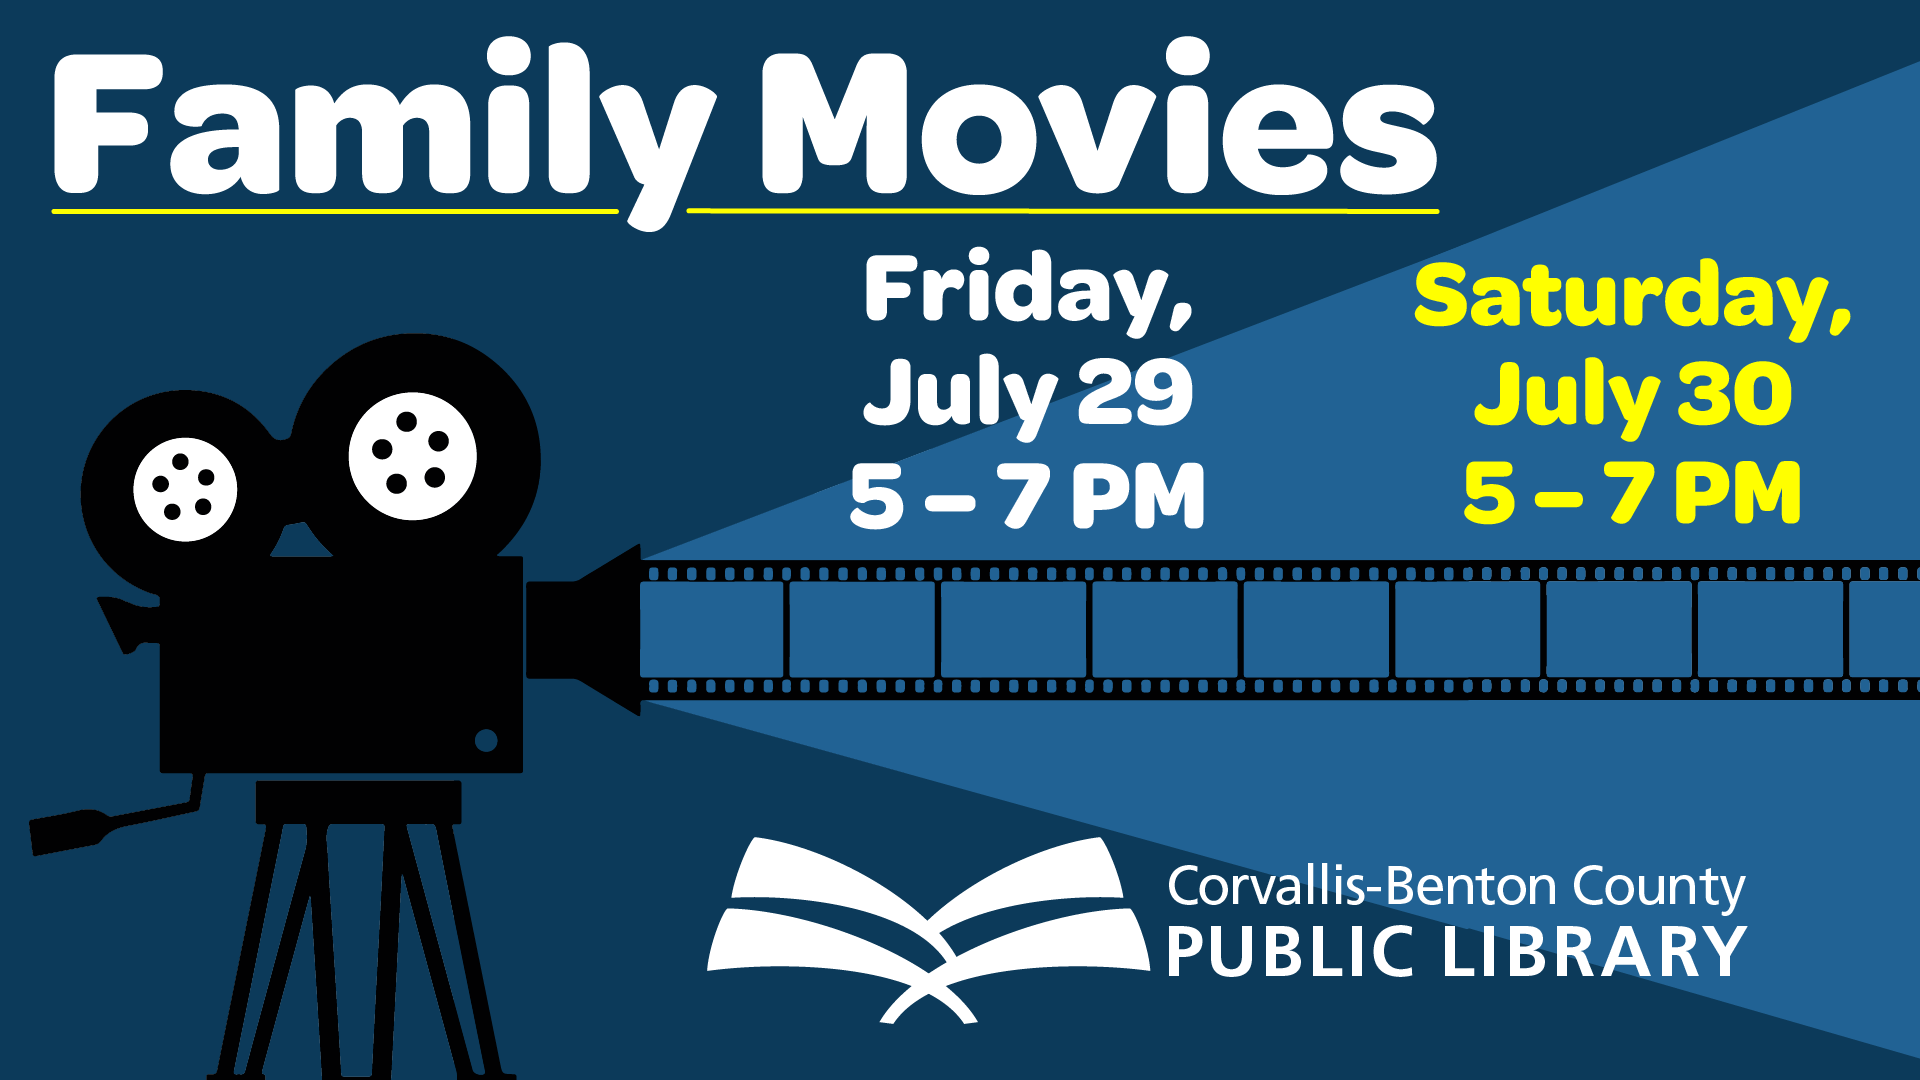 Family Movies, Friday July 29 and Saturday July 30 from 5 to 7 PM